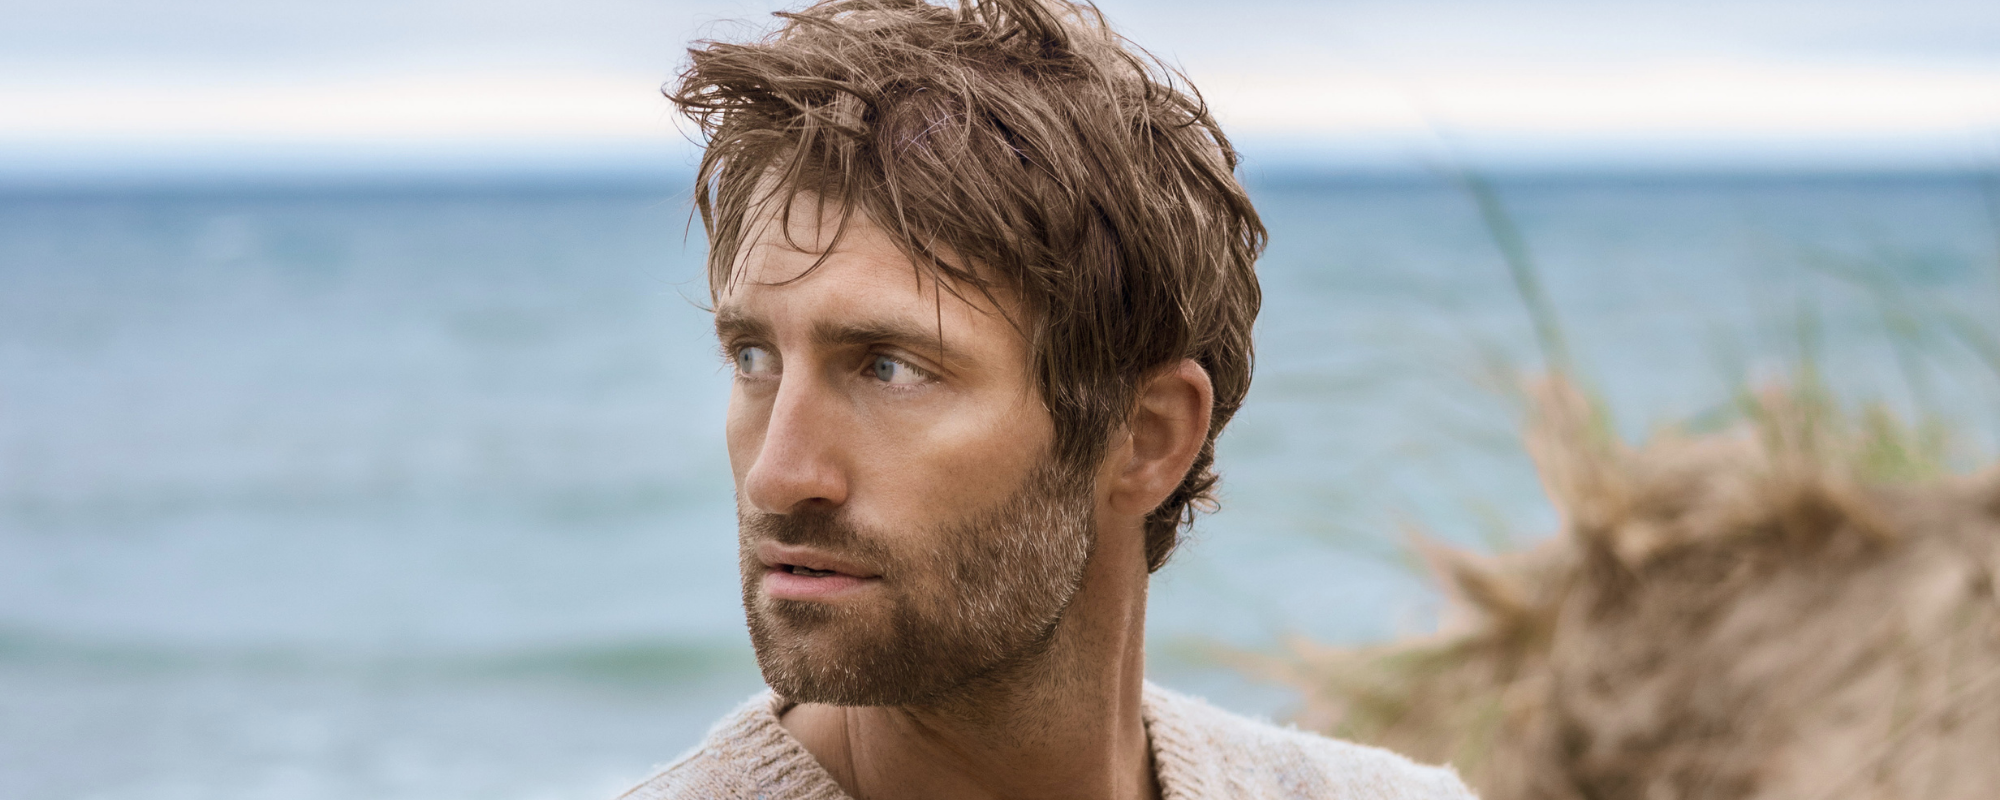 Ryan Hurd Proves ‘Pelago’ To Be the Perfect Title For His Debut LP